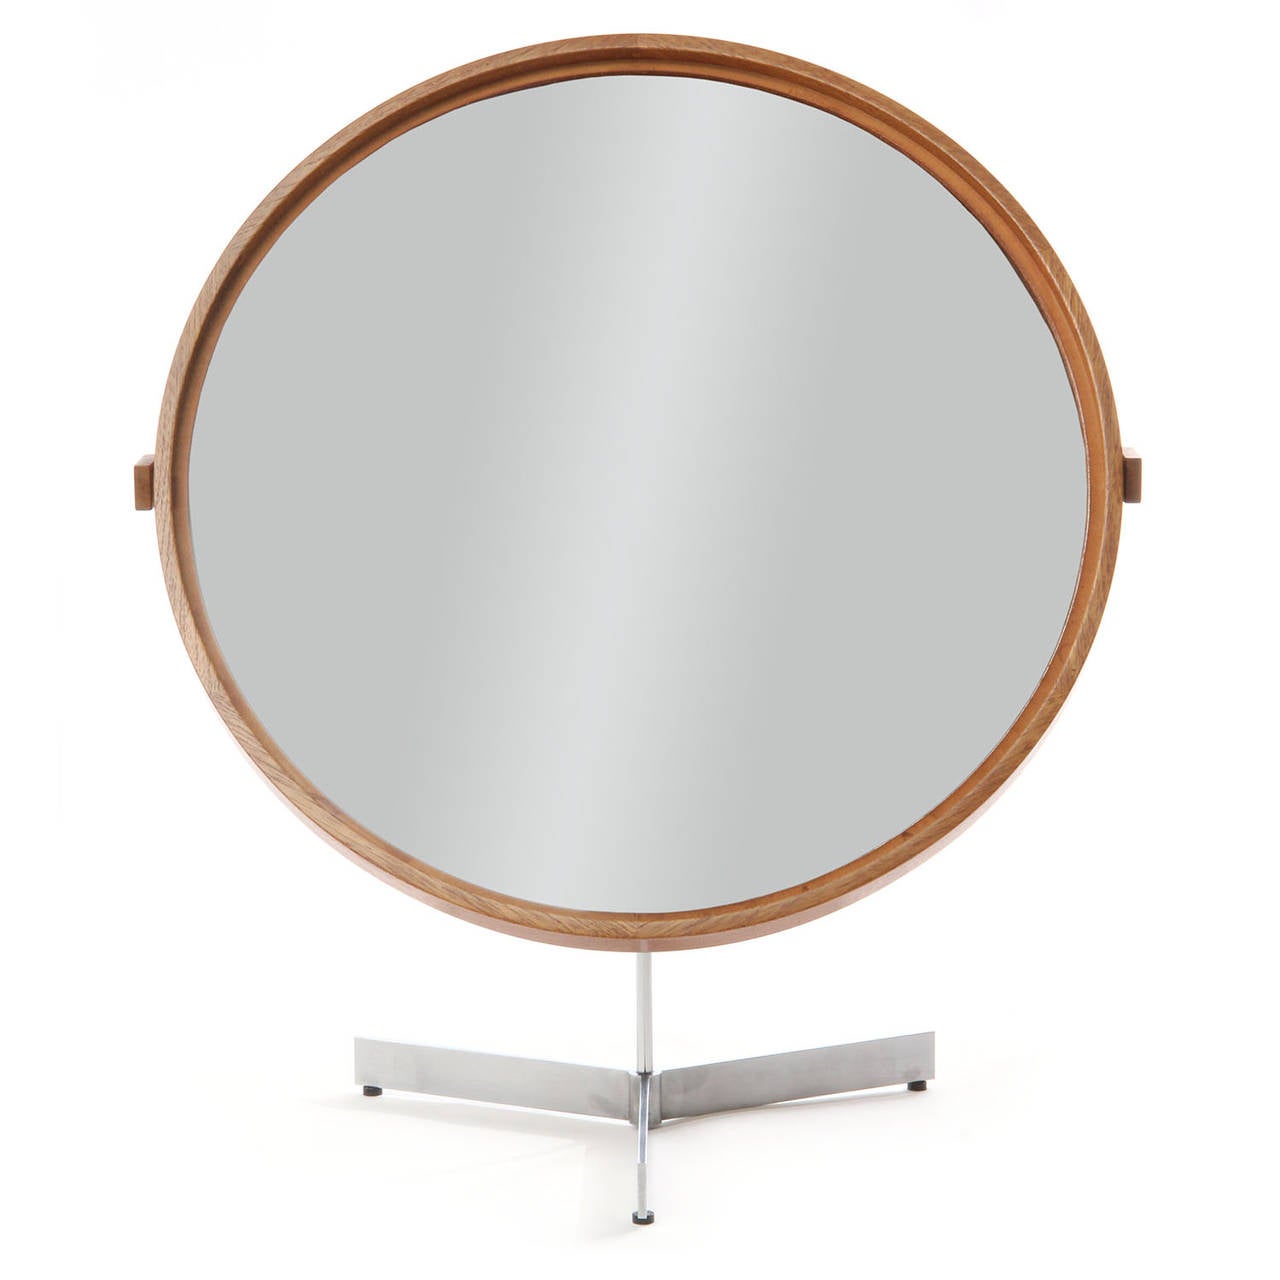 A Scandinavian Modern vanity mirror featuring an elegant tilting and swiveling oak framed that floats on an architectural brushed steel tripod base. Crafted by Luxus in Sweden, circa 1960s.